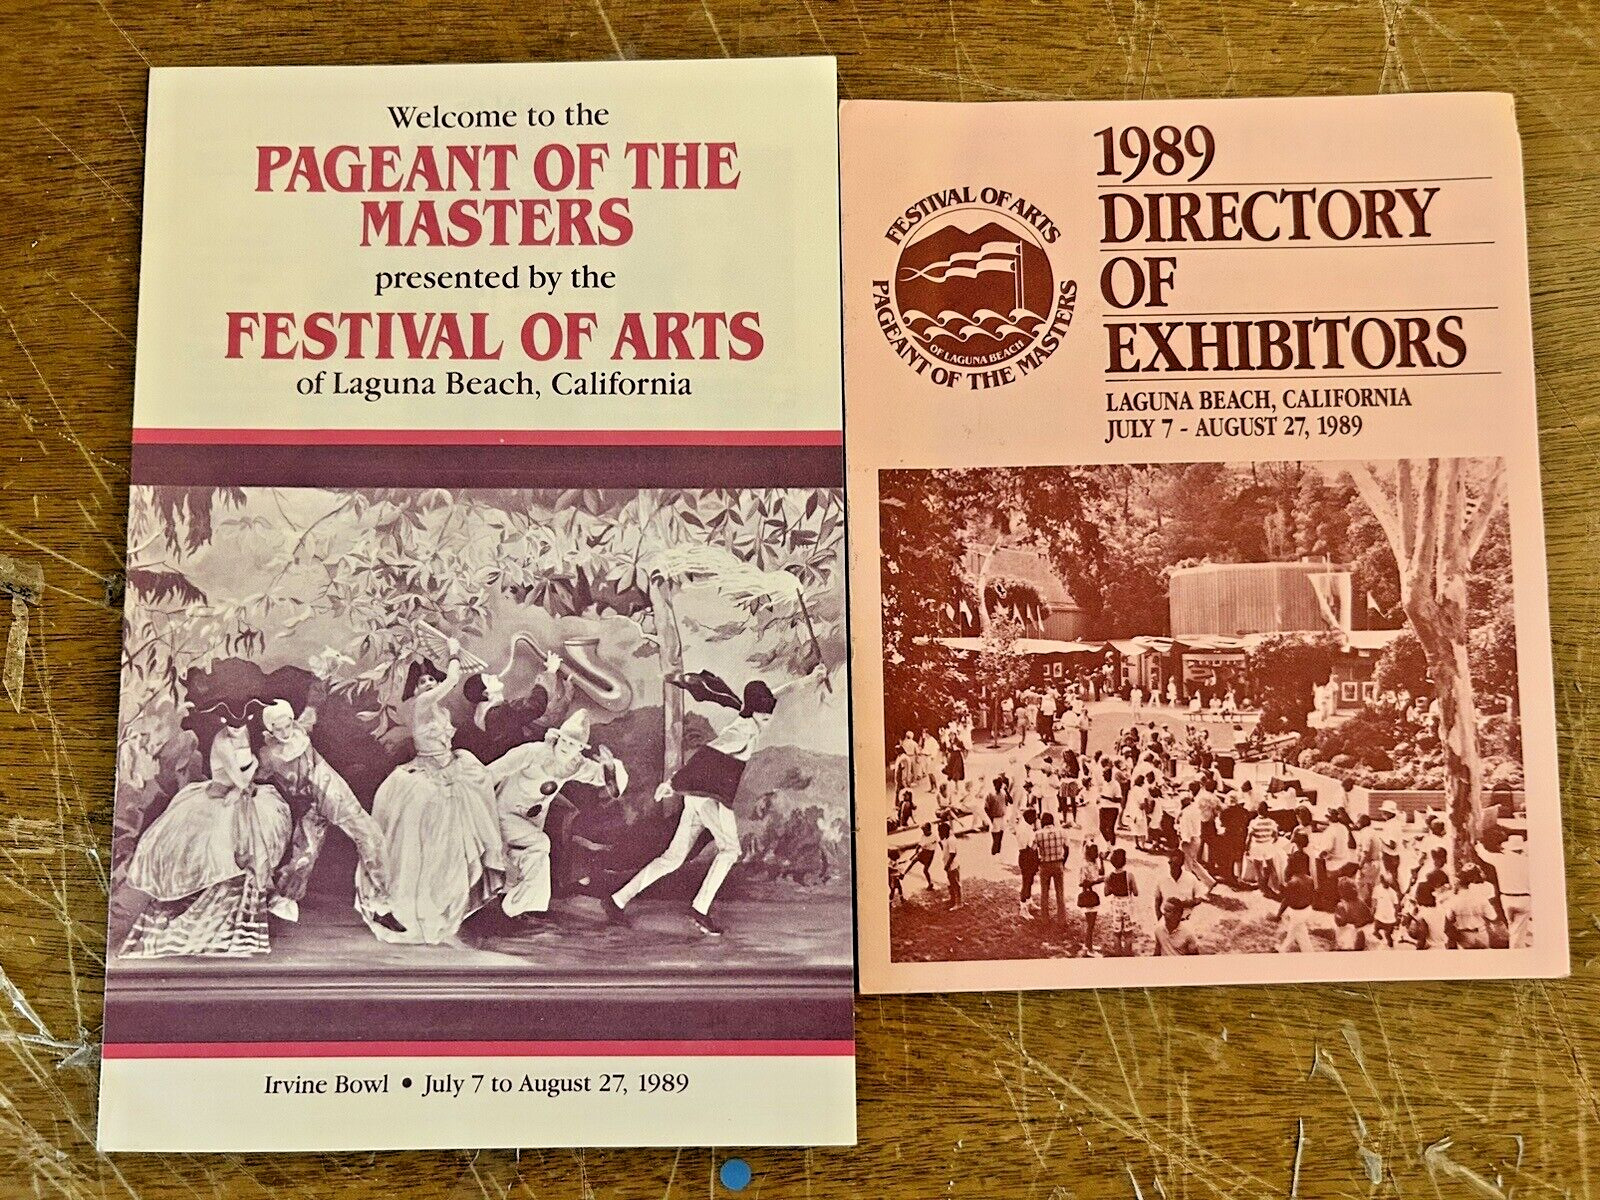 Festival of Arts Pageant of the Masters 1989 Pamphlet and Directory of Exhibits